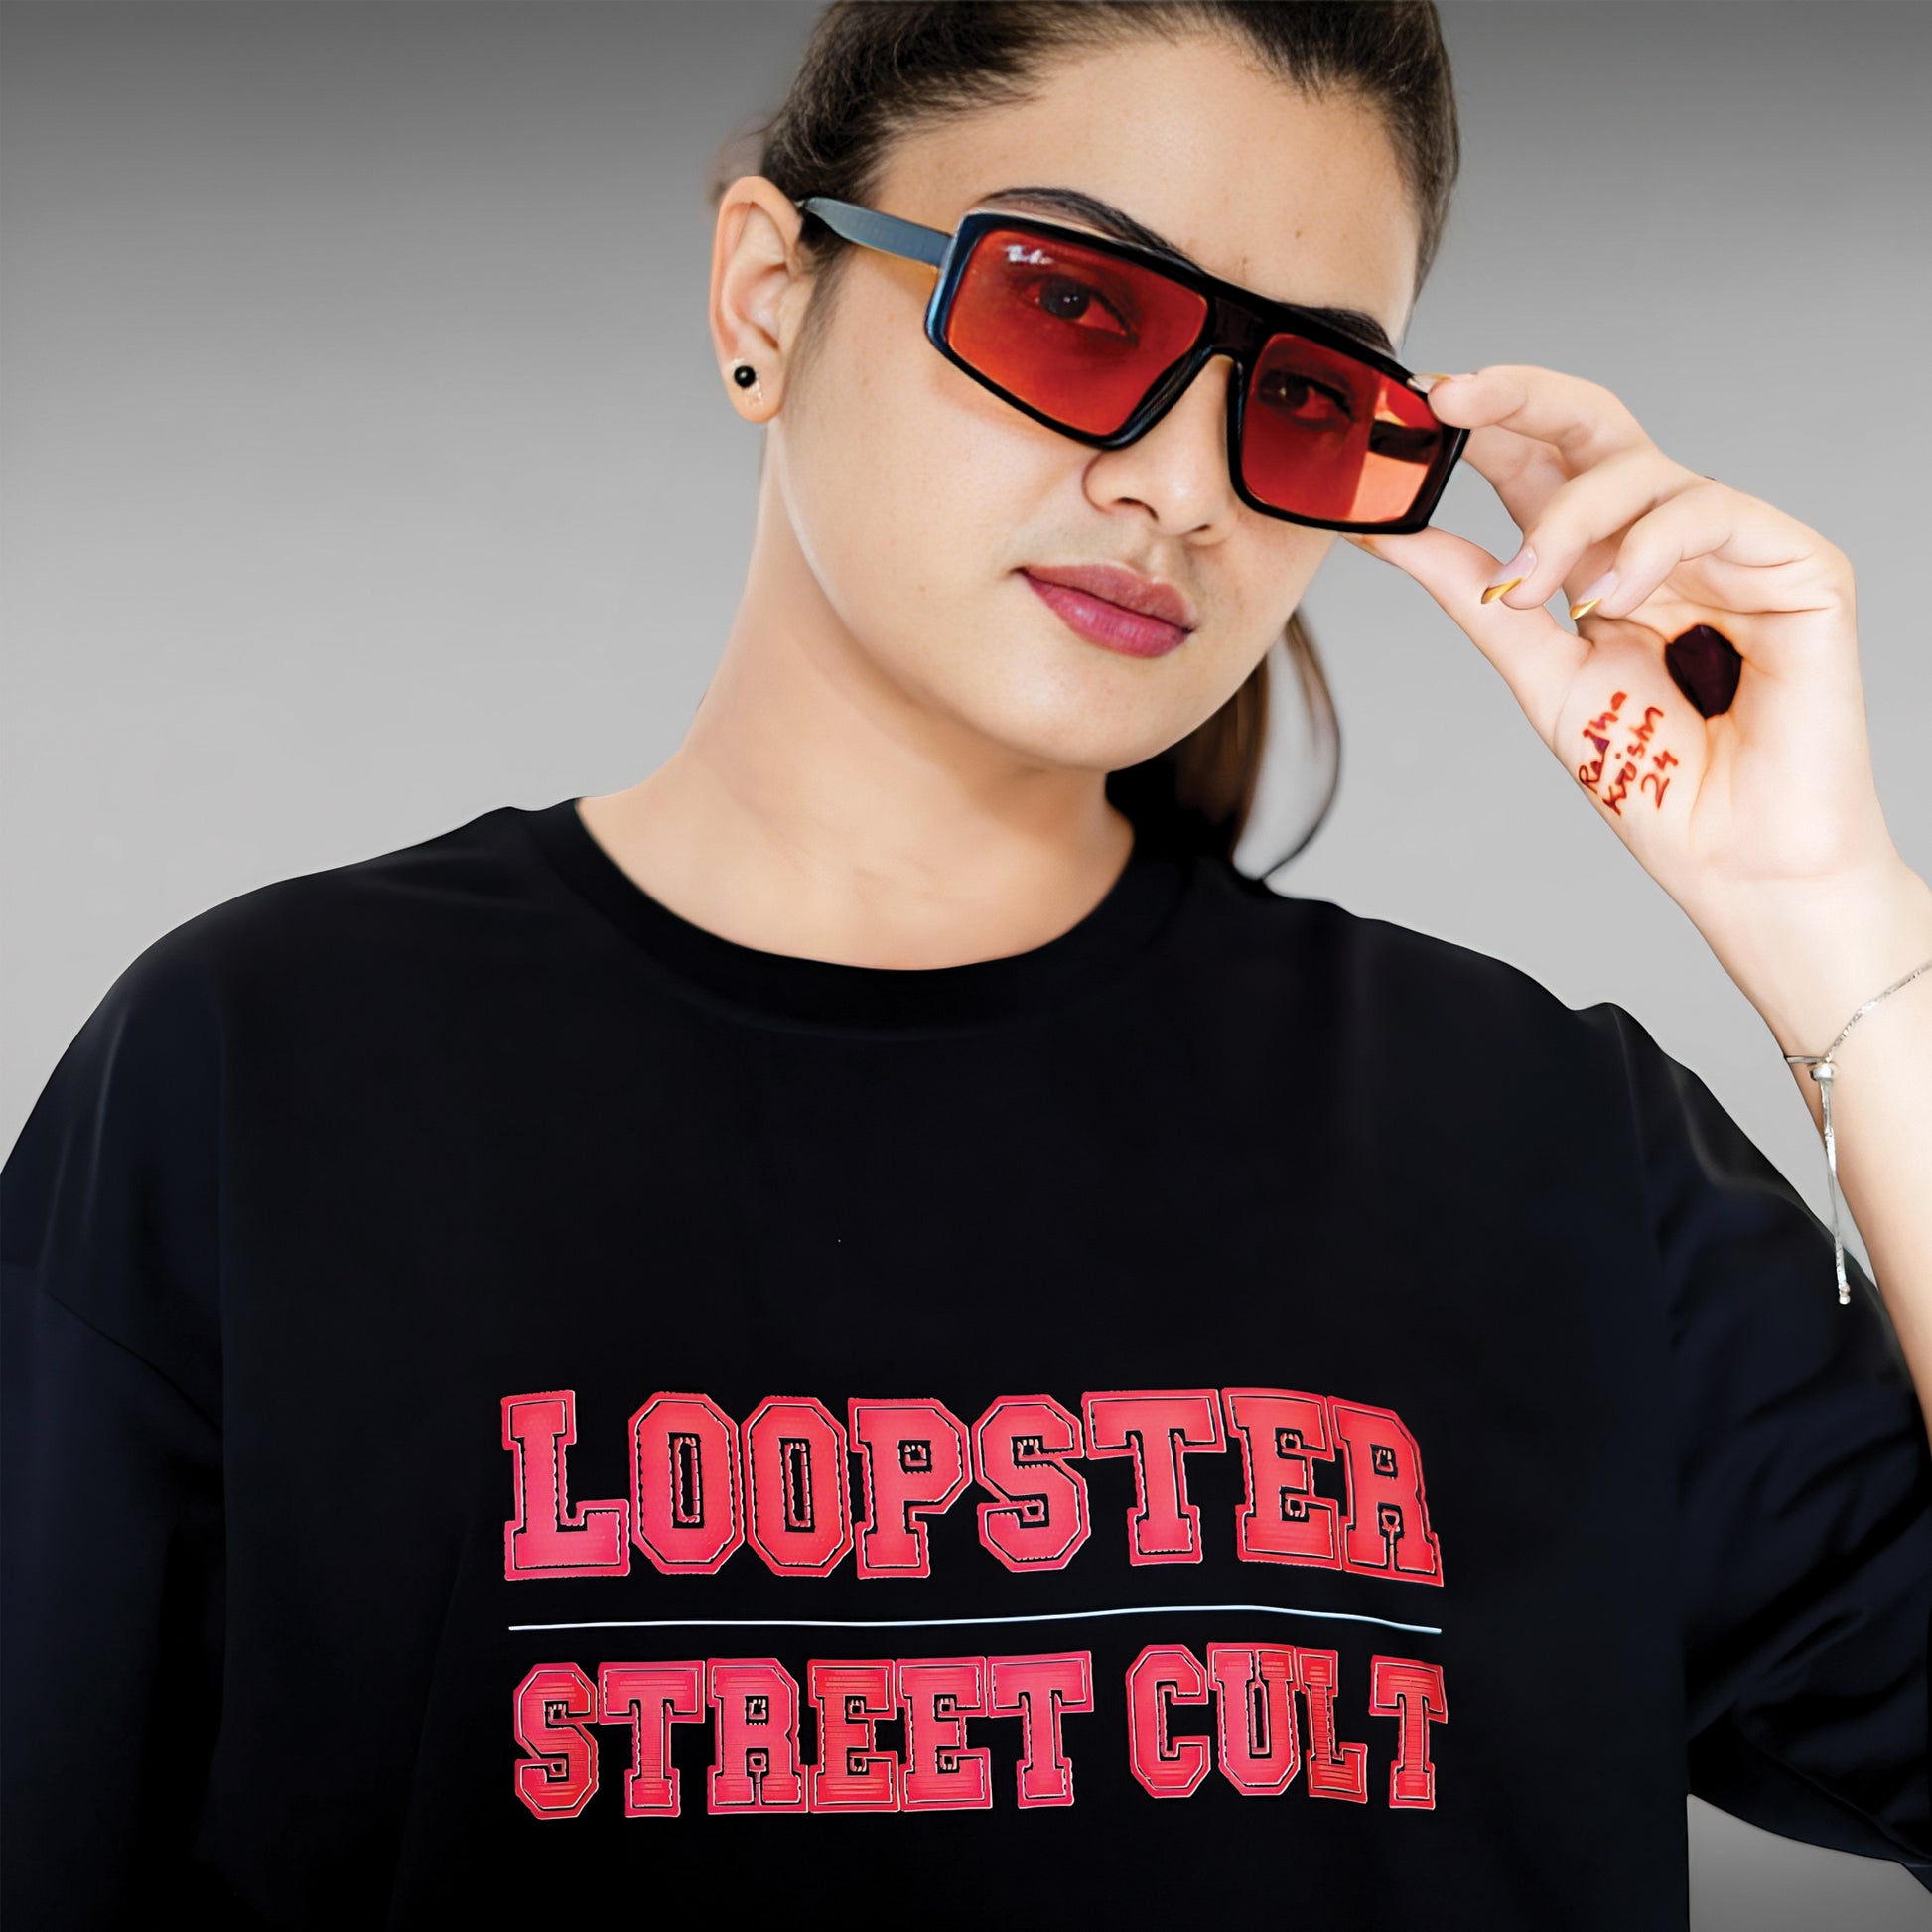 Black Premium Relaxed Fit Street Cult T-shirt (230 GSM) - Loopster